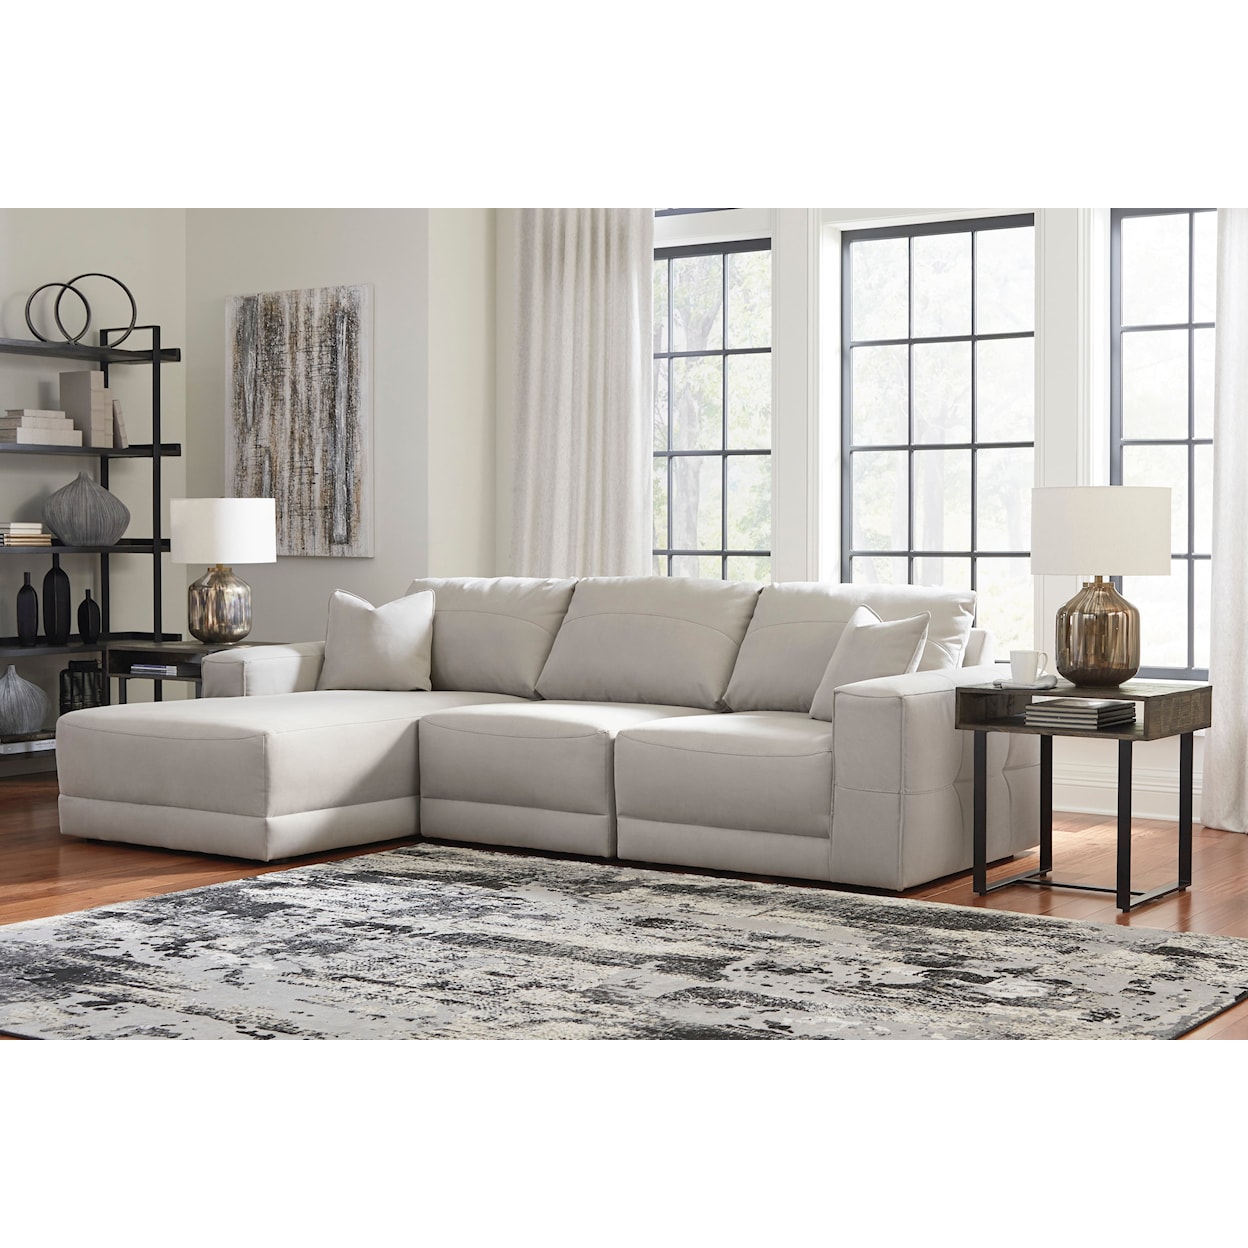 Benchcraft by Ashley Next-Gen Gaucho 3-Piece Sectional Sofa with Chaise